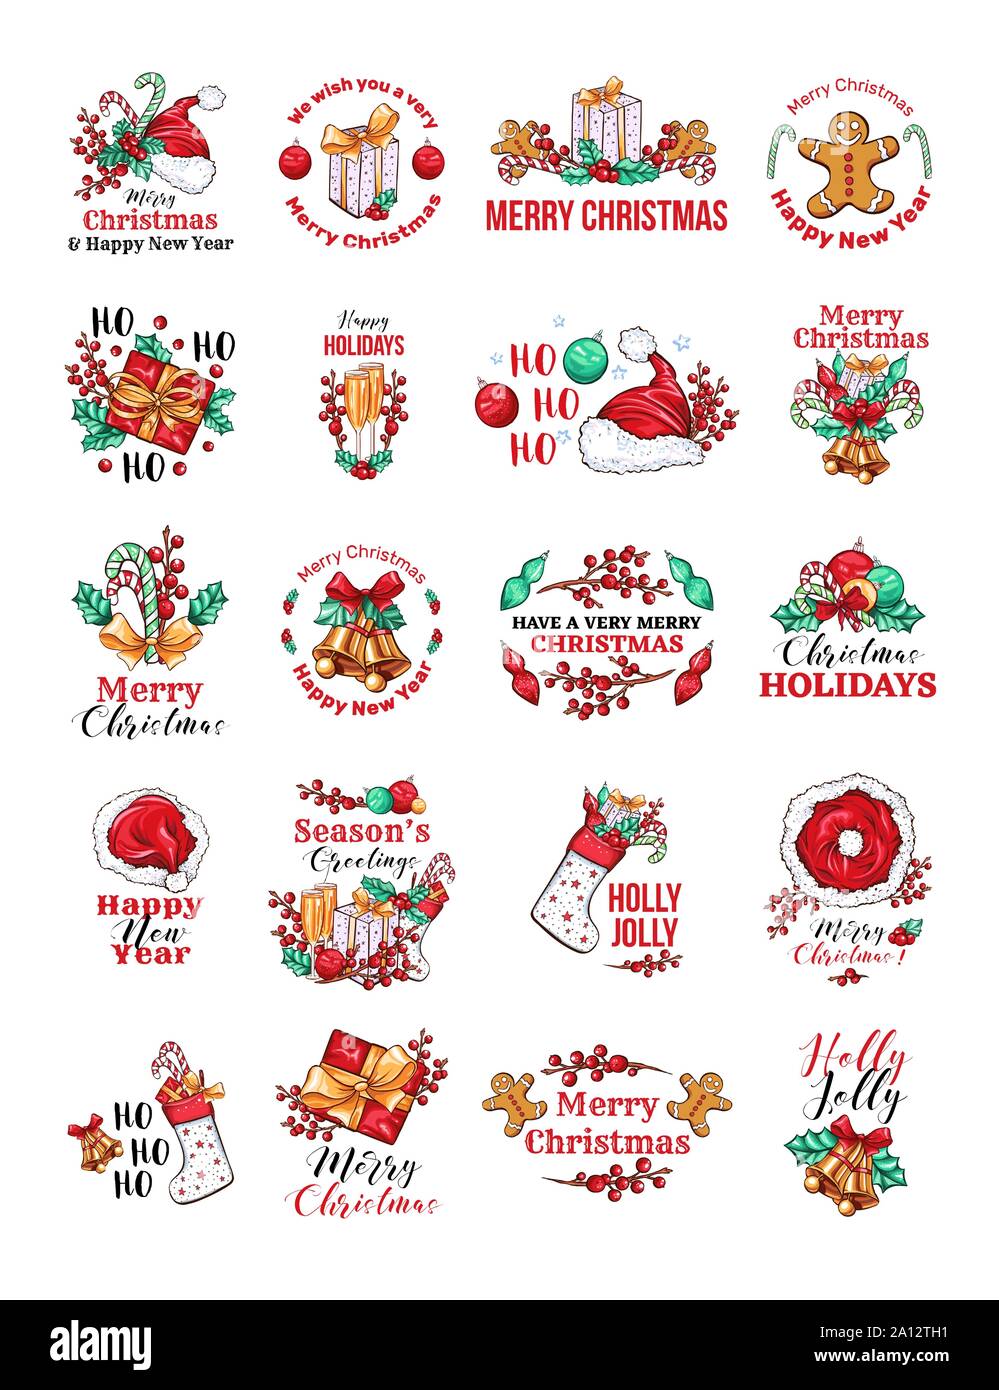 Christmas holidays logo vector set. Winter season festive hand drawn color stickers with typography pack. Merry Xmas, Ho Ho Ho greetings letterings. New Year celebration badges isolated collection Stock Vector